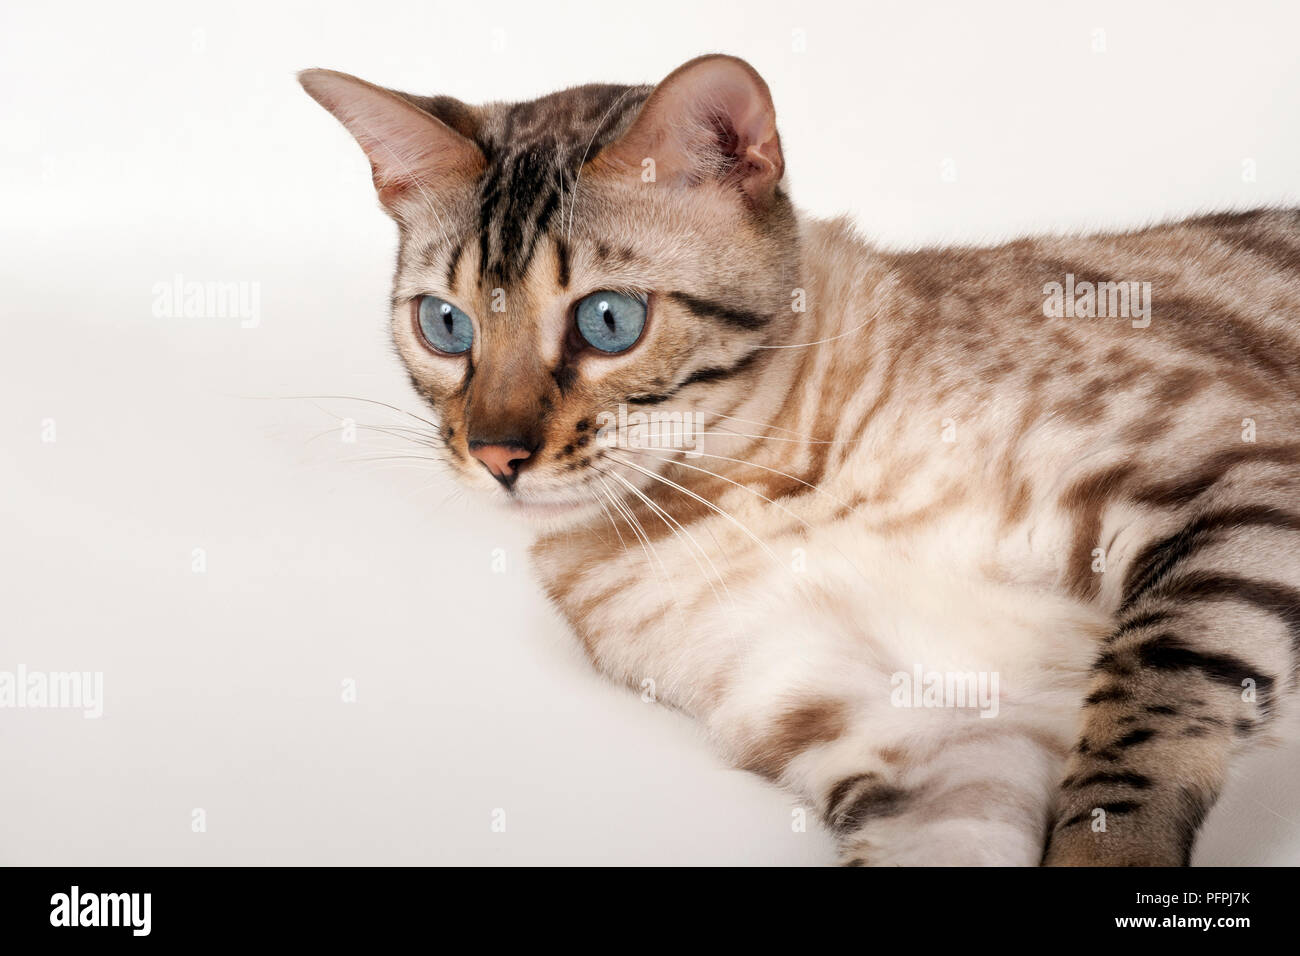 Brown rosetted Bengal cat with blue eyes, lying down, close-up Stock Photo